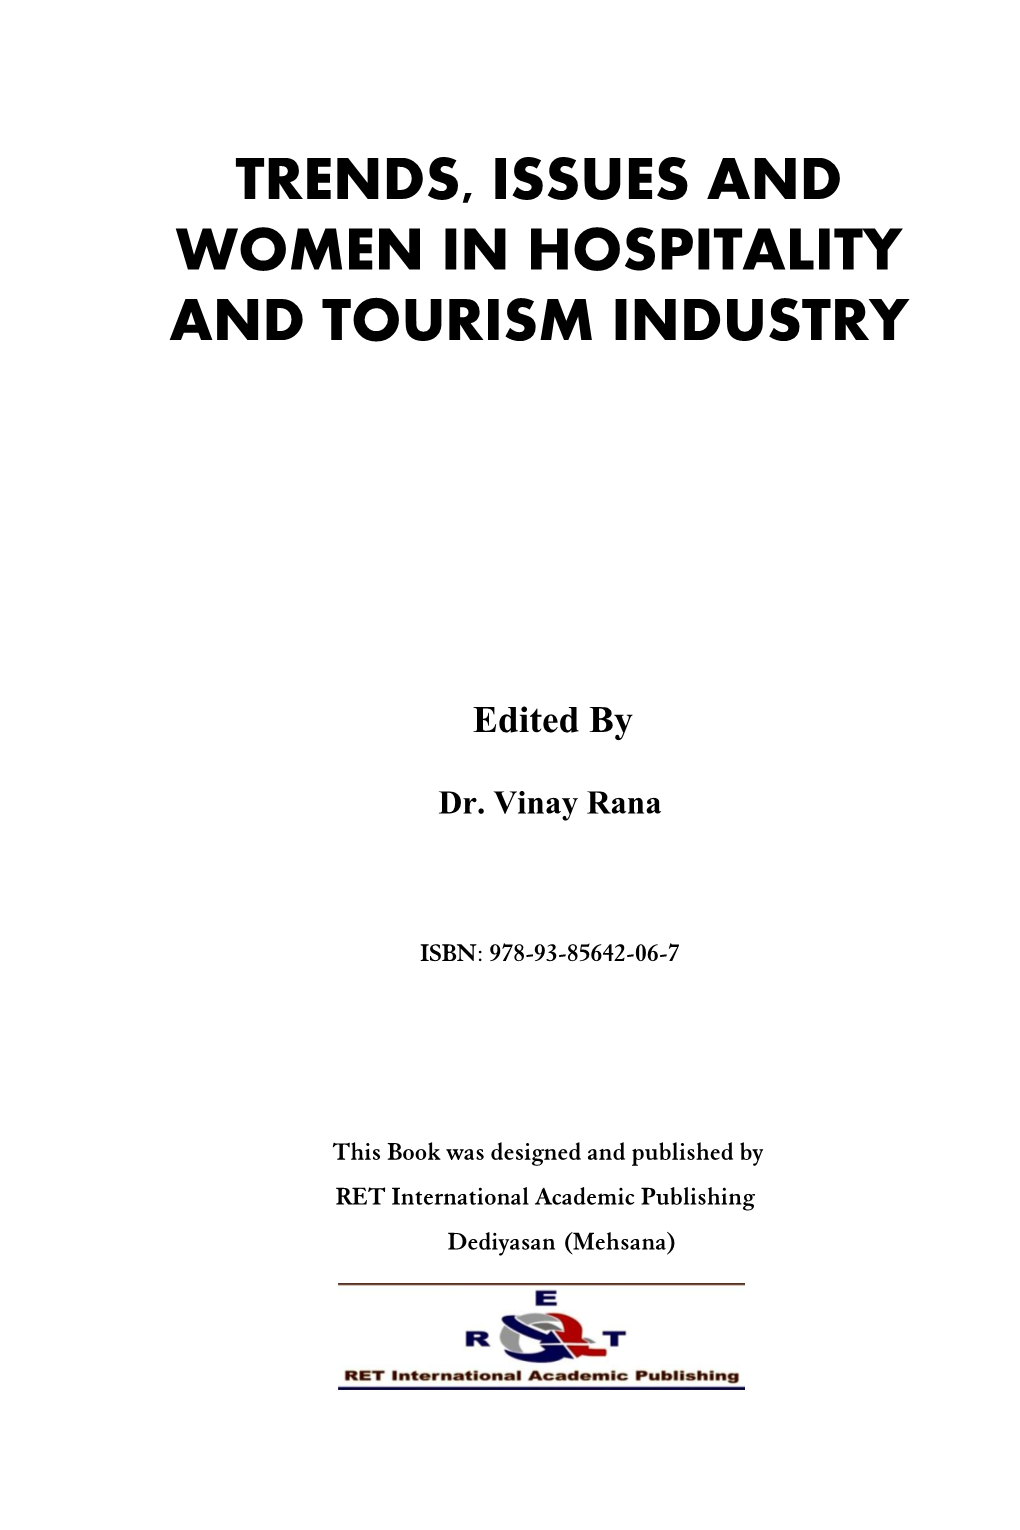 Trends, Issues and Women in Hospitality and Tourism Industry